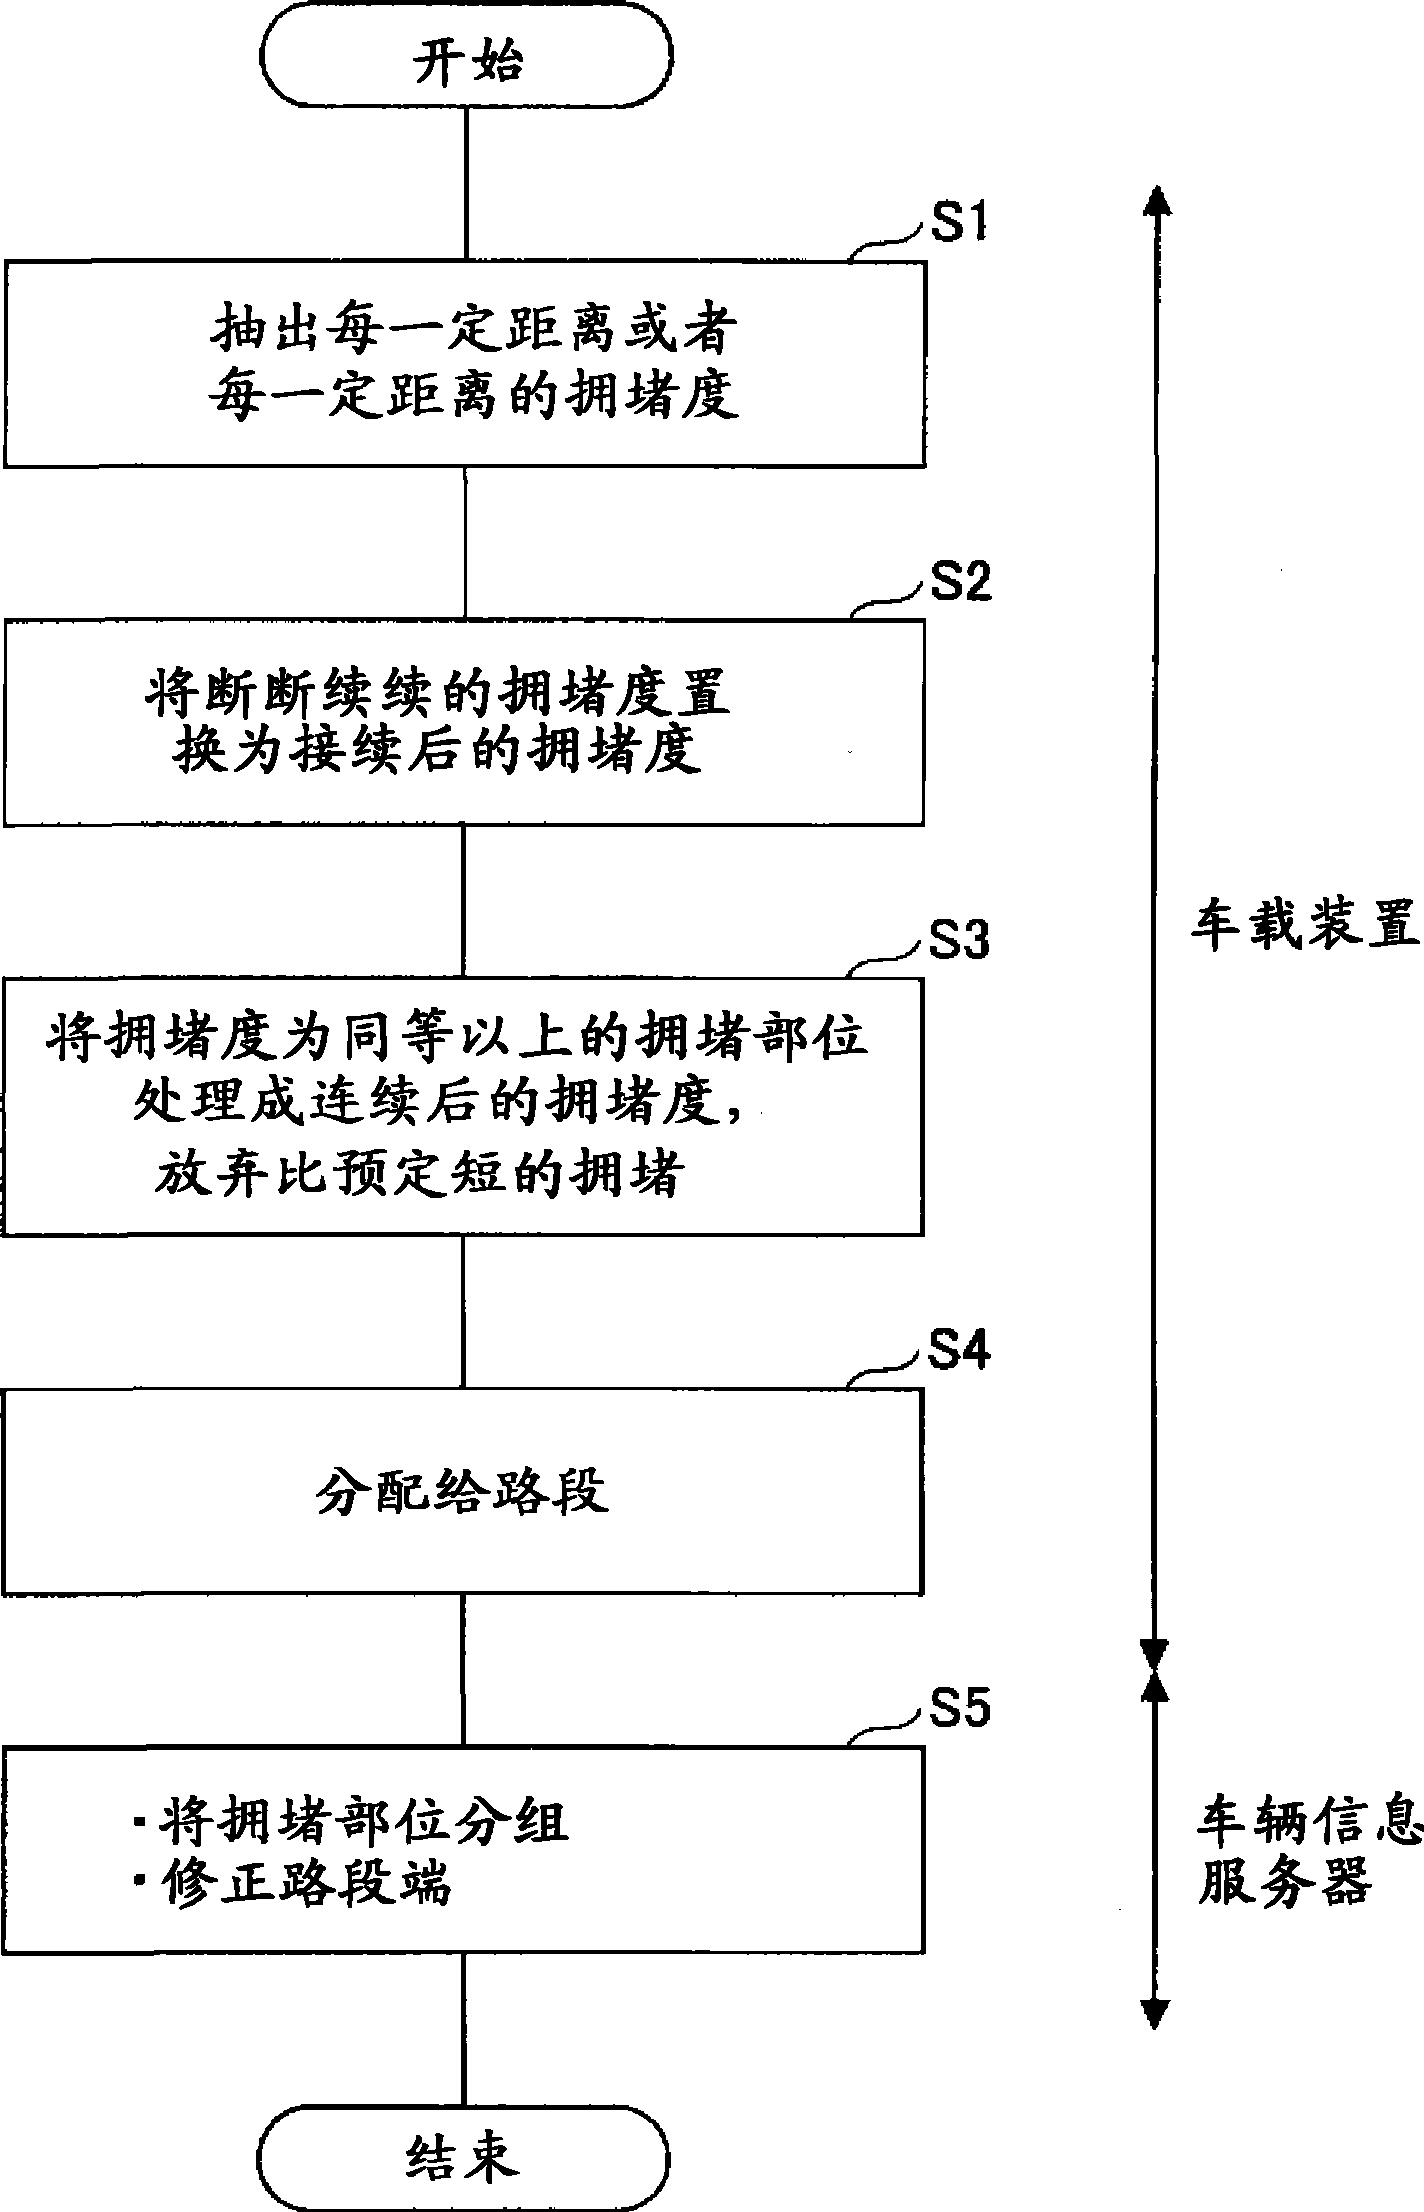 Traffic information creating method, traffic information creating device, display, navigation system, and electronic control unit